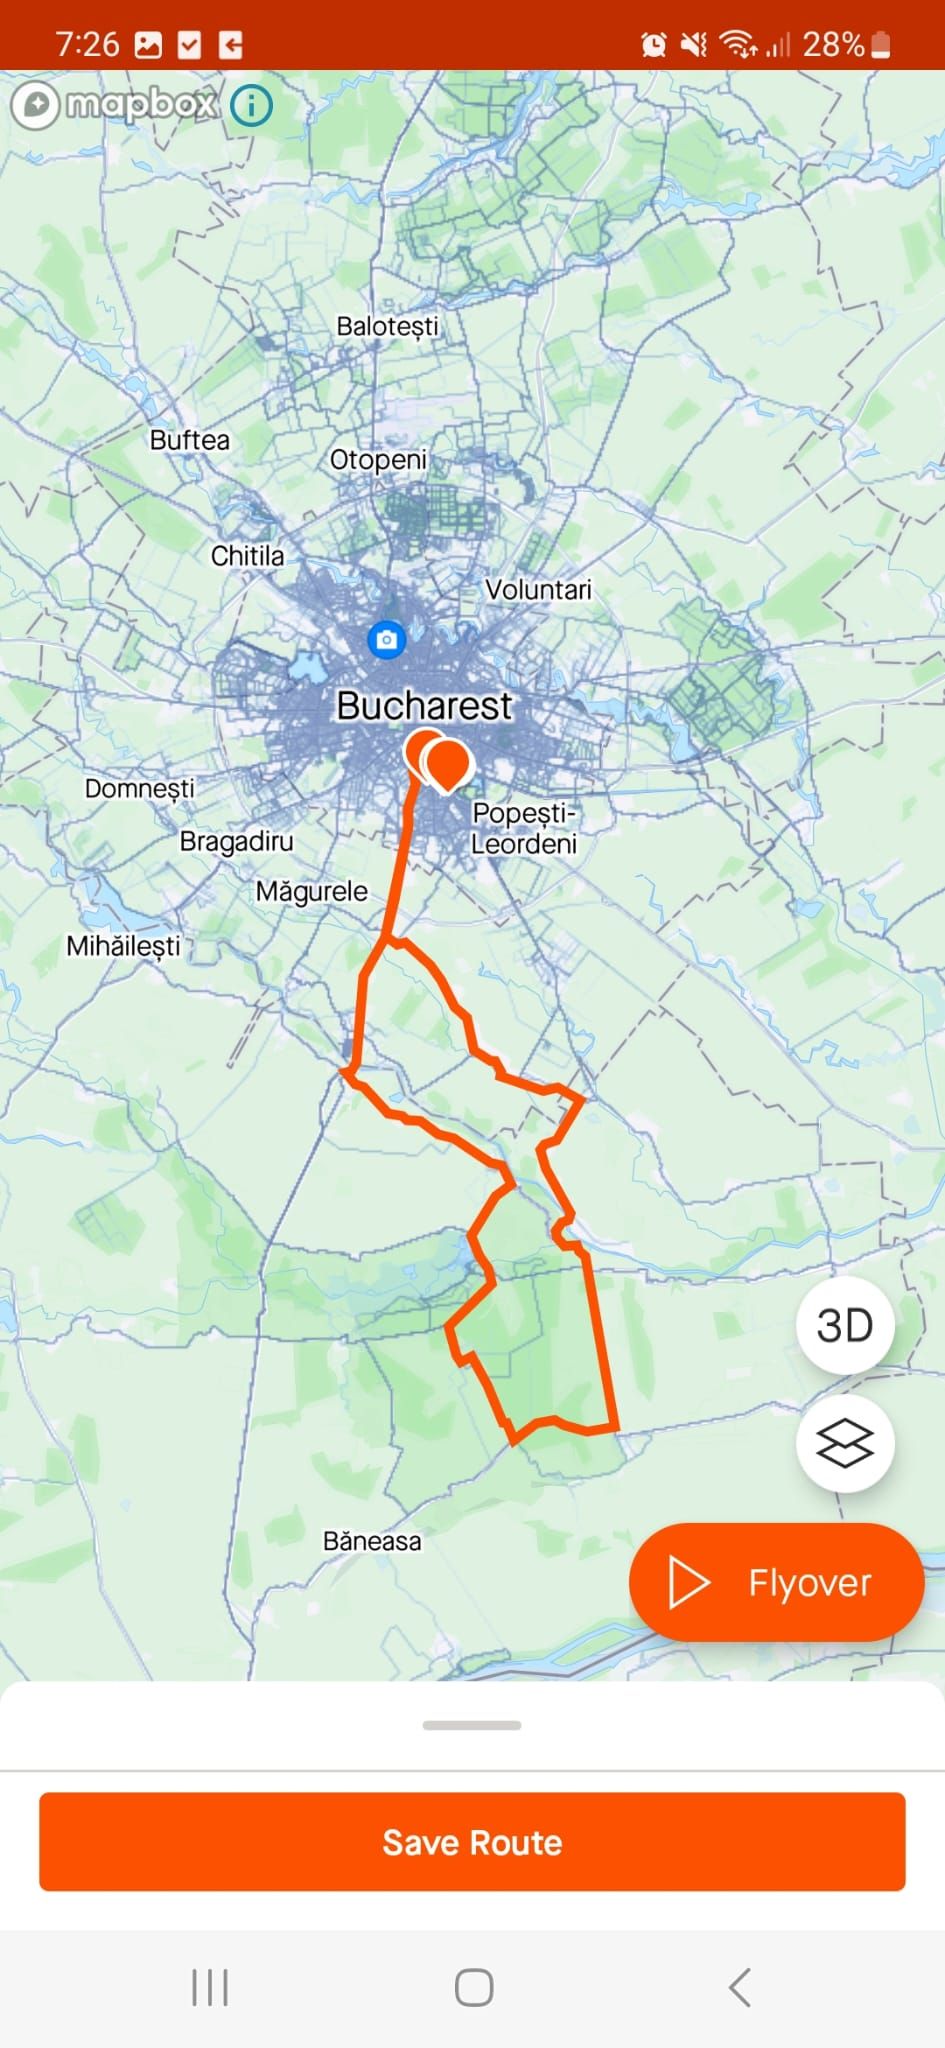 How to save a new route on Strava